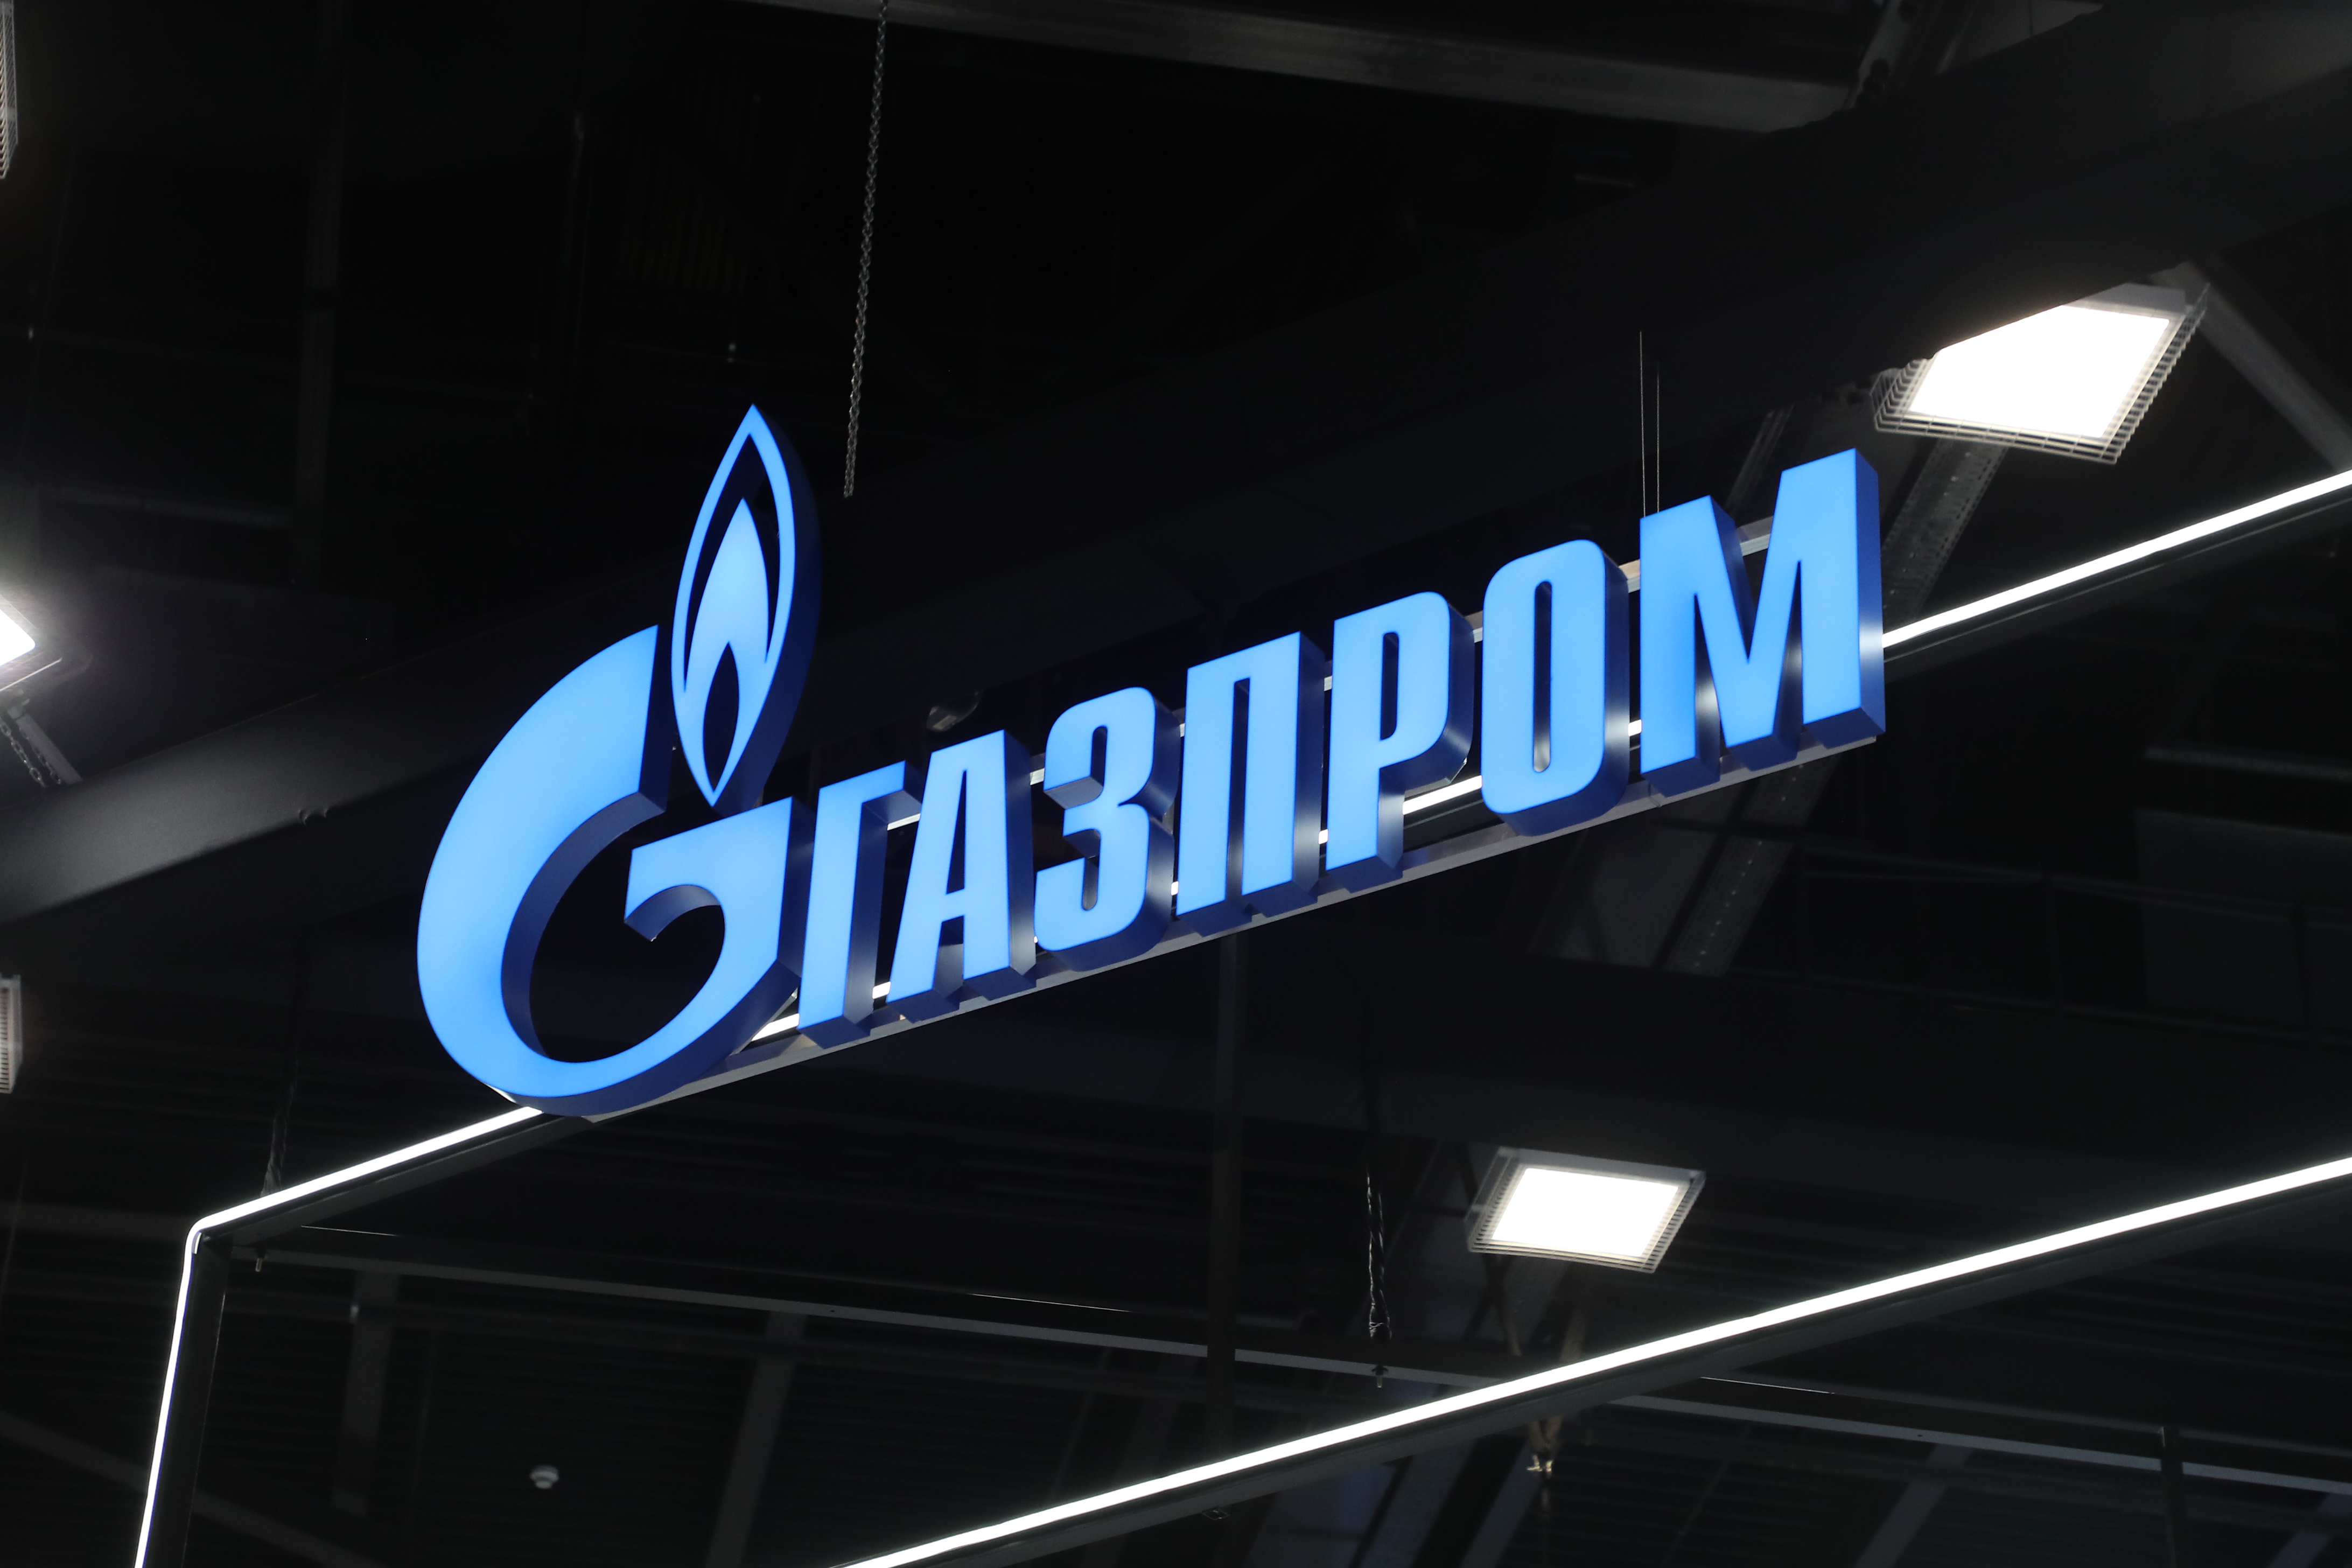 Gazprom Management Committee proposes record dividends of RUB 10.43 per share for 2018